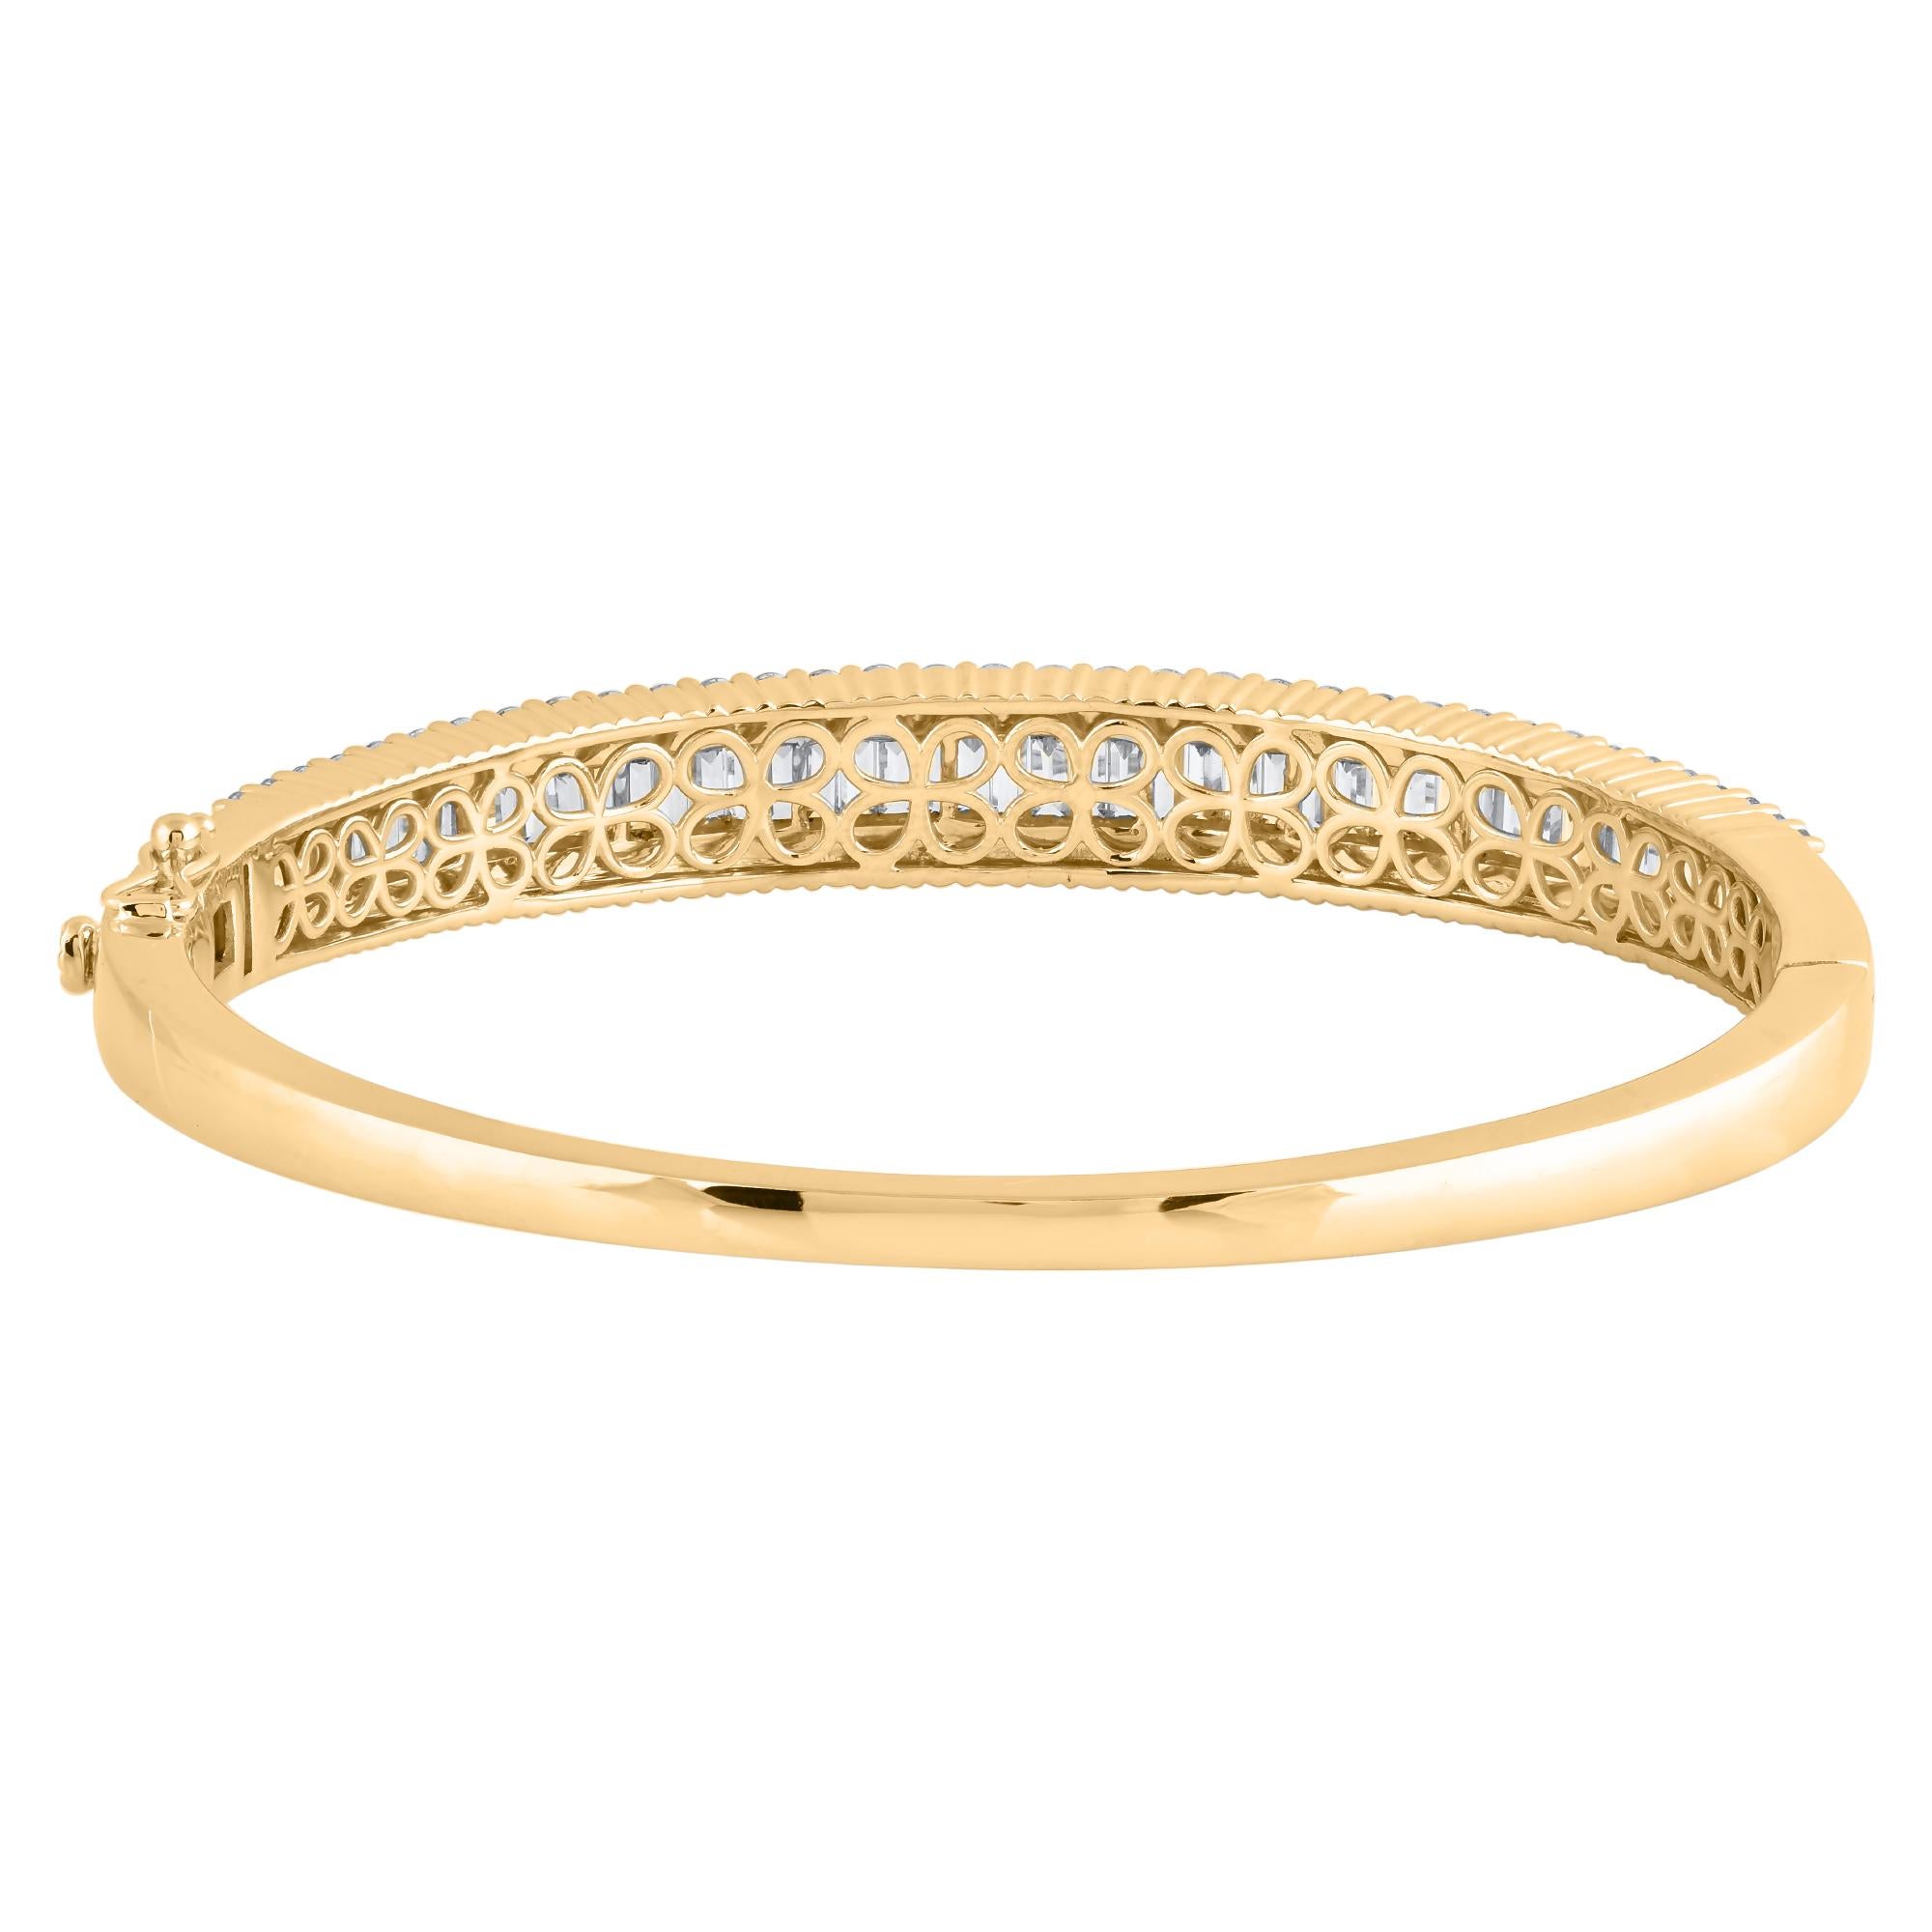 Baguette Cut TJD 5.0 Ct Natural Round & Baguette Diamond Bangle Bracelet in 18KT Yellow Gold For Sale